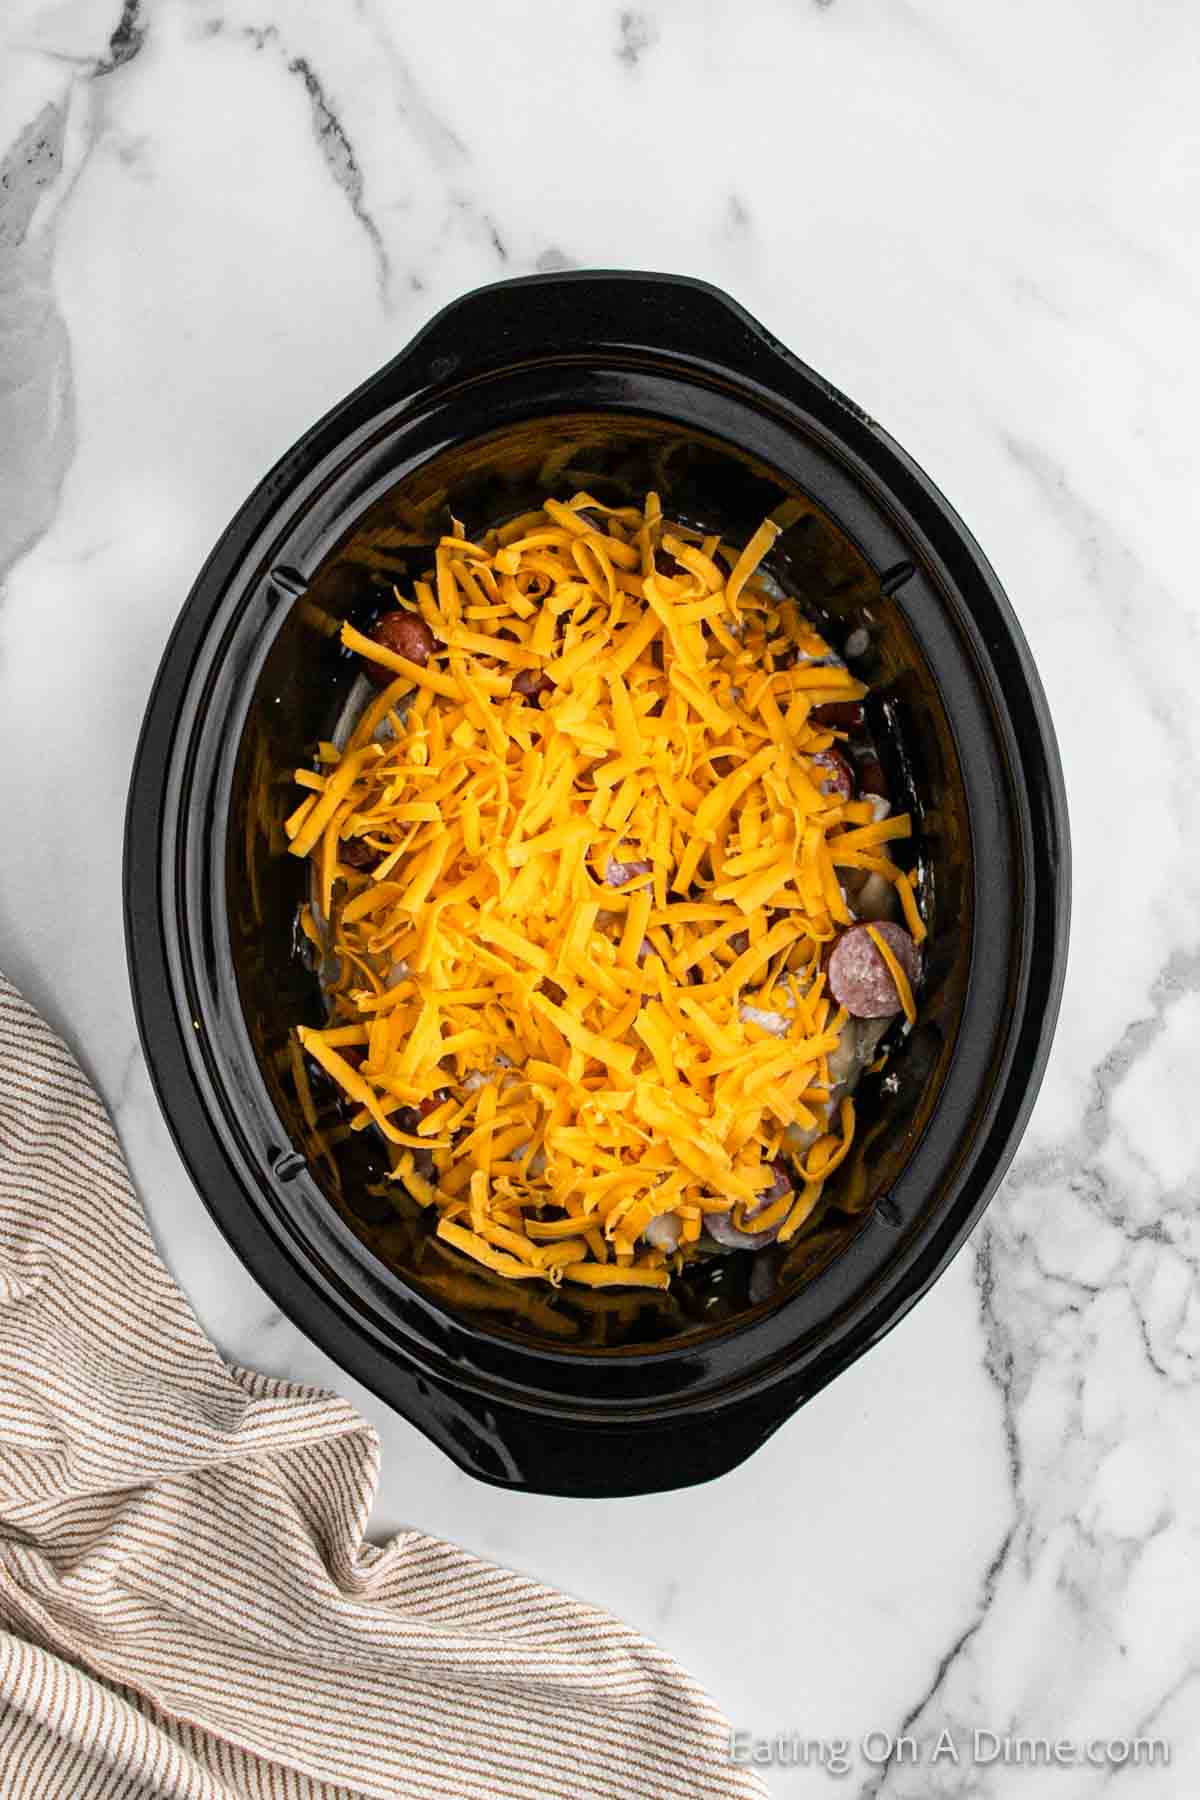 Top with shredded cheese